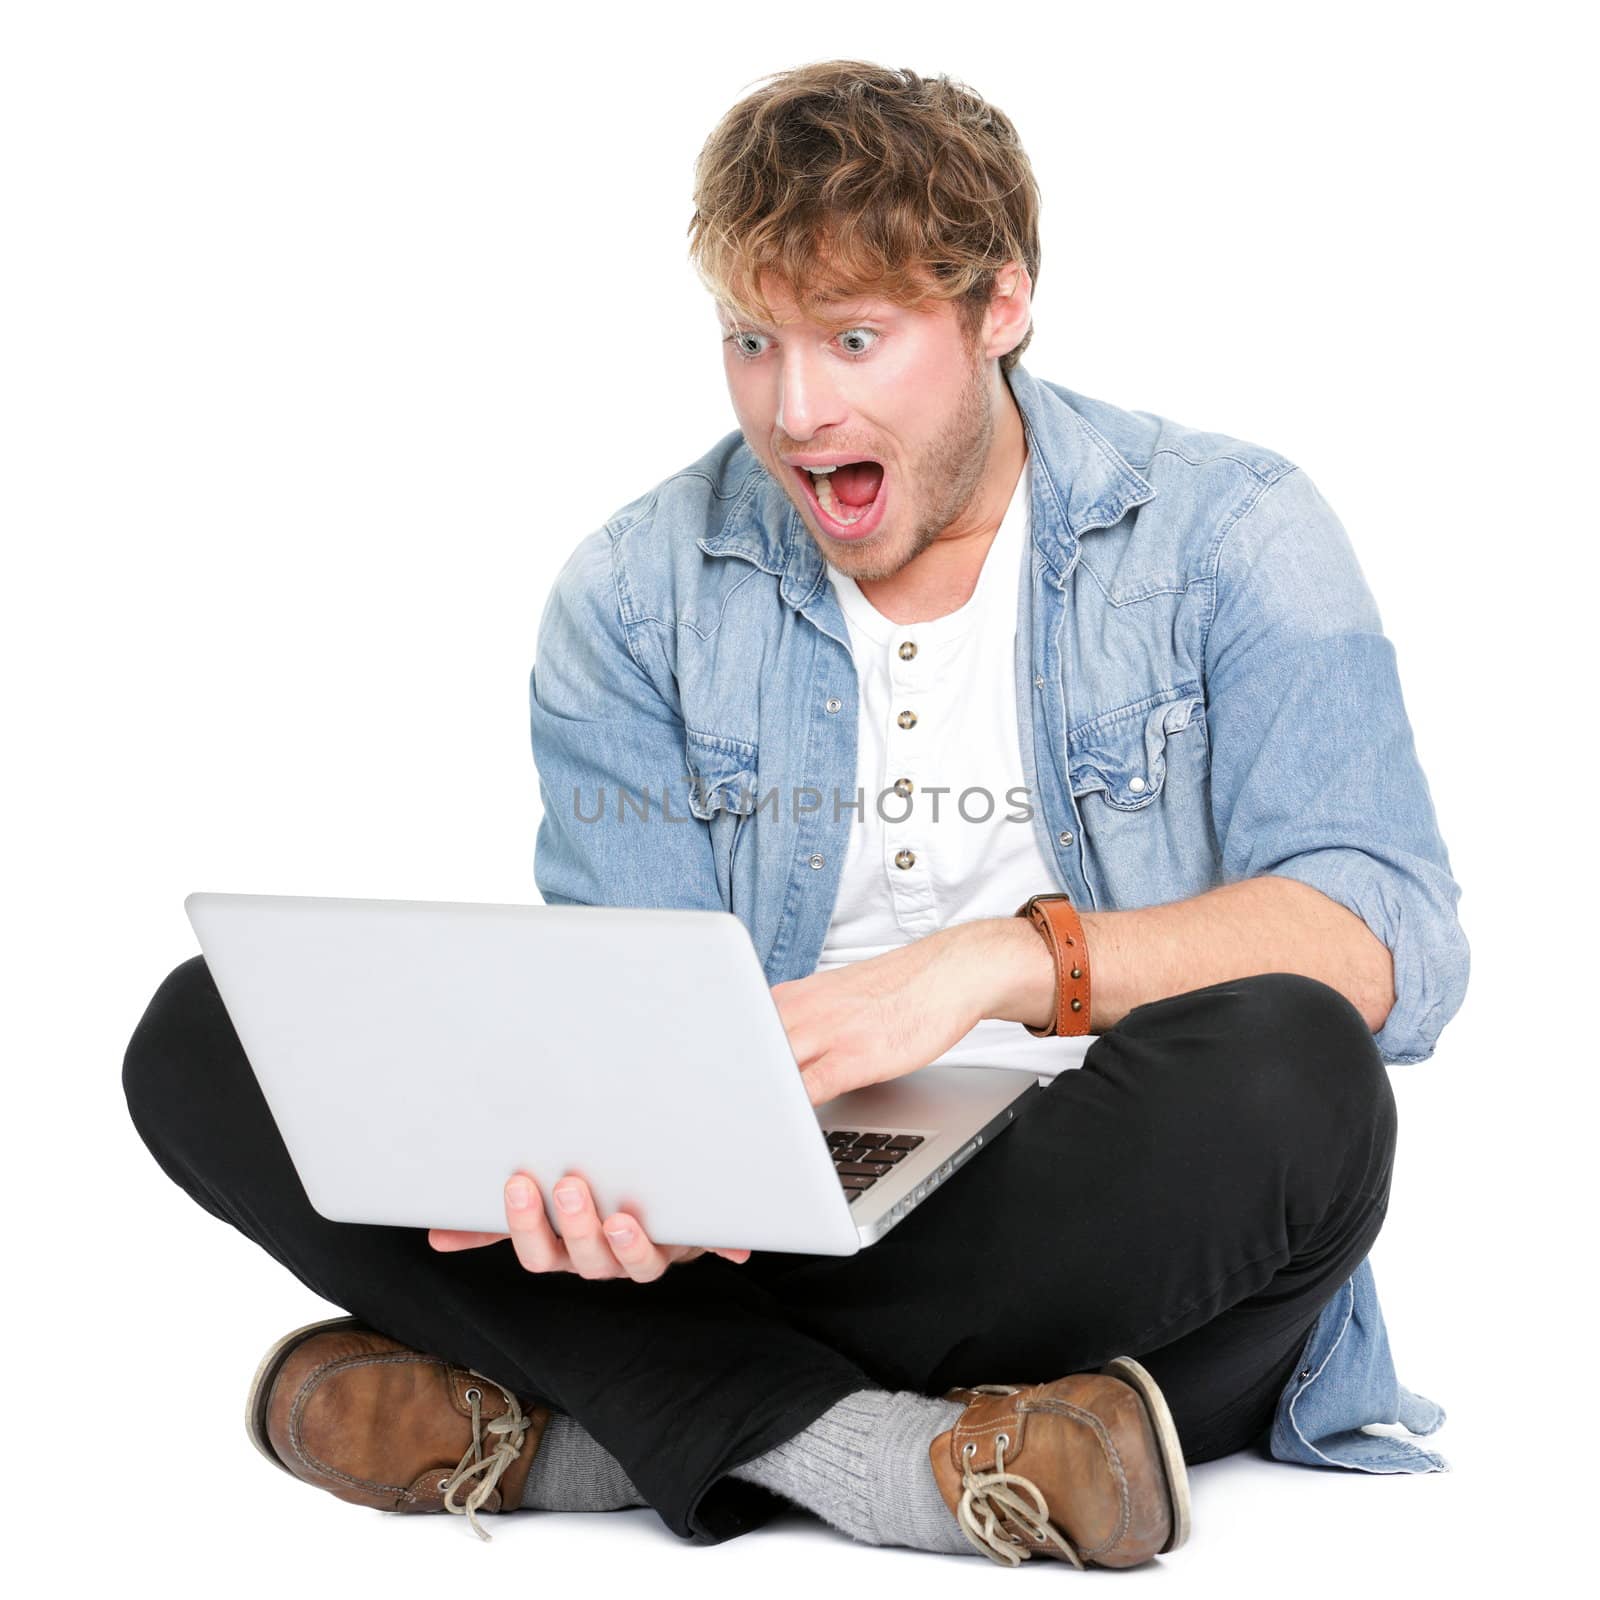 Man surprised with laptop computer looking at screen excited and happy in disbelief. Funny image of young Caucasian male student model sitting on floor isolated on white background.